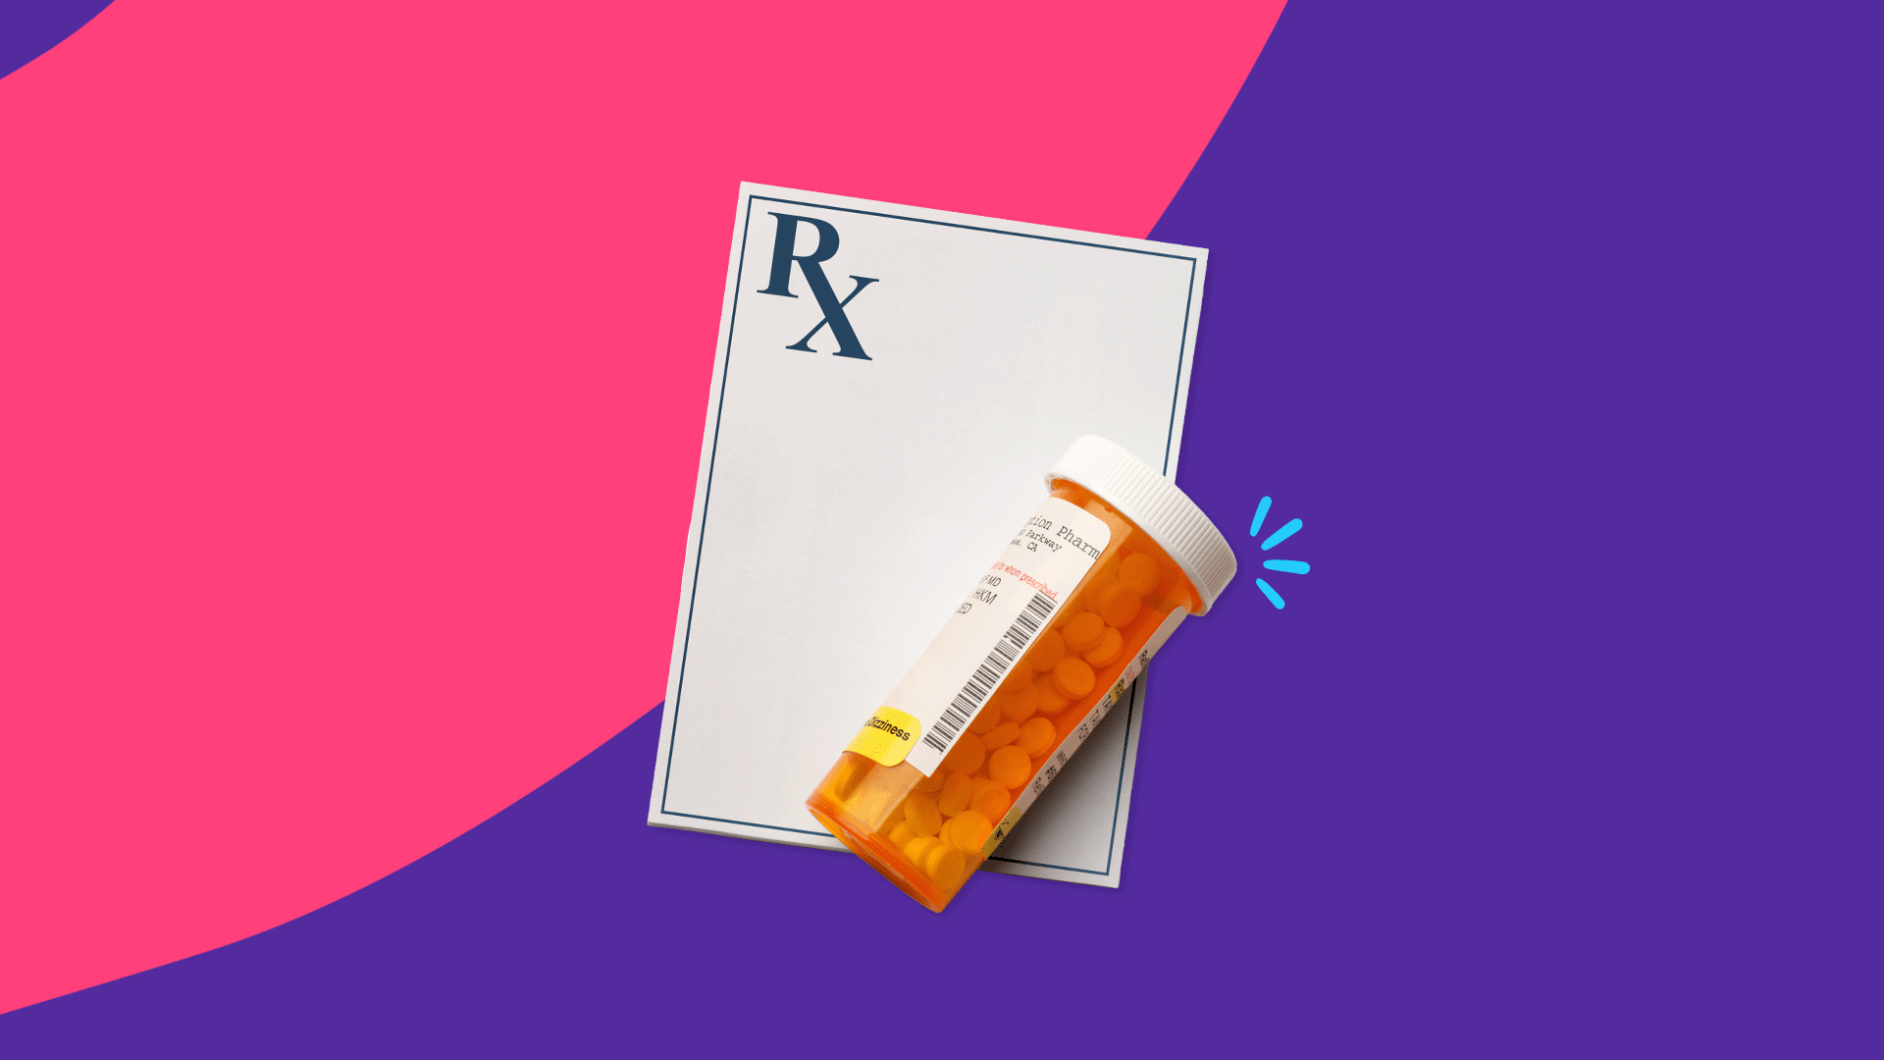 Rx prescription pad and pill bottle: What is diclofenac?